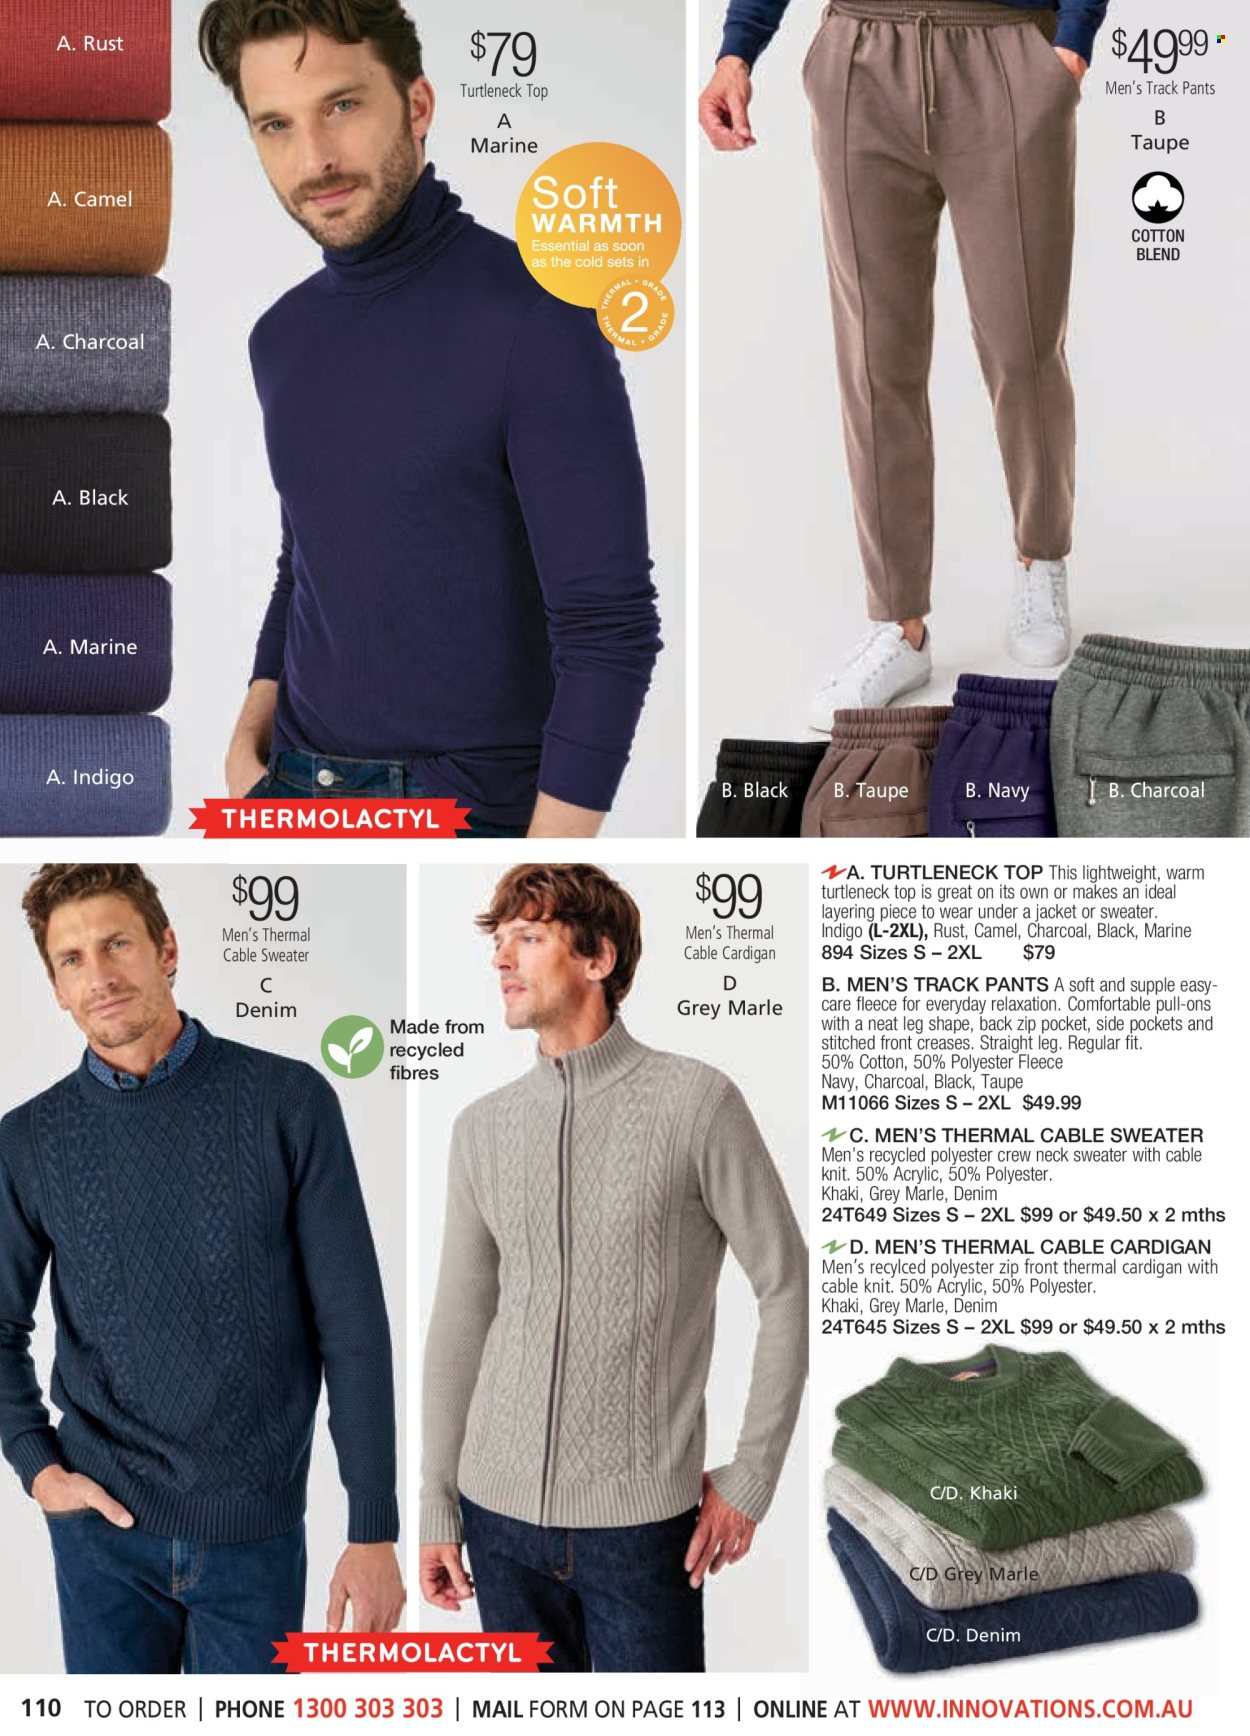 thumbnail - Innovations Catalogue - Sales products - jacket, Denim, pants, track pants, cardigan, sweater. Page 110.